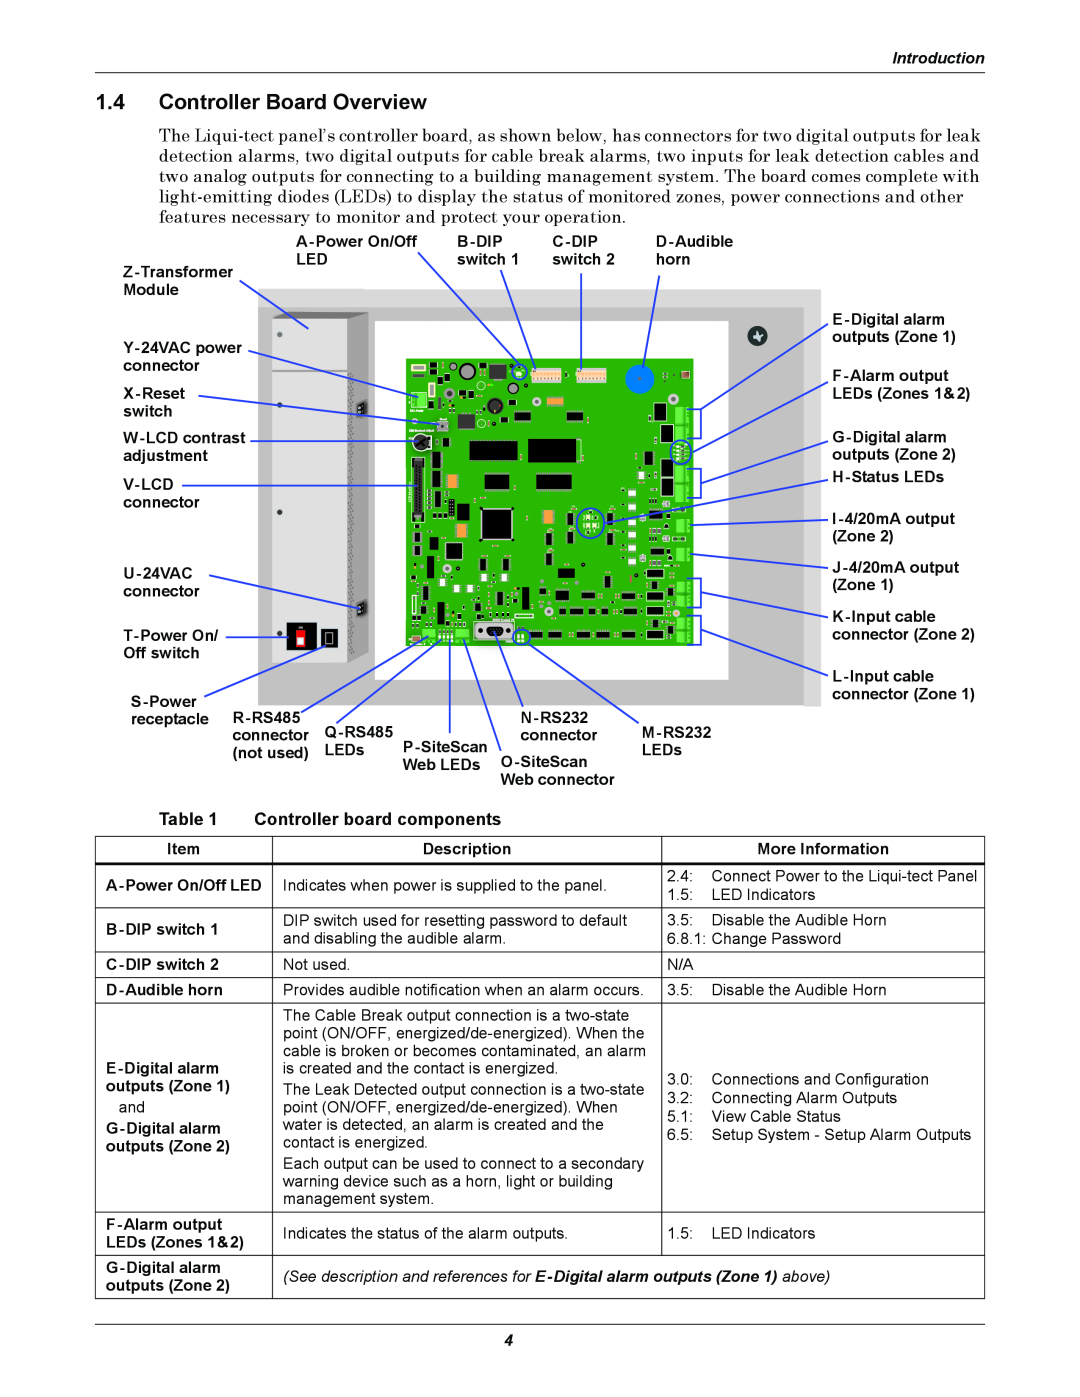 Emerson MC68HC16Z1 user manual 1.4Controller Board Overview, Controller board components, Introduction 